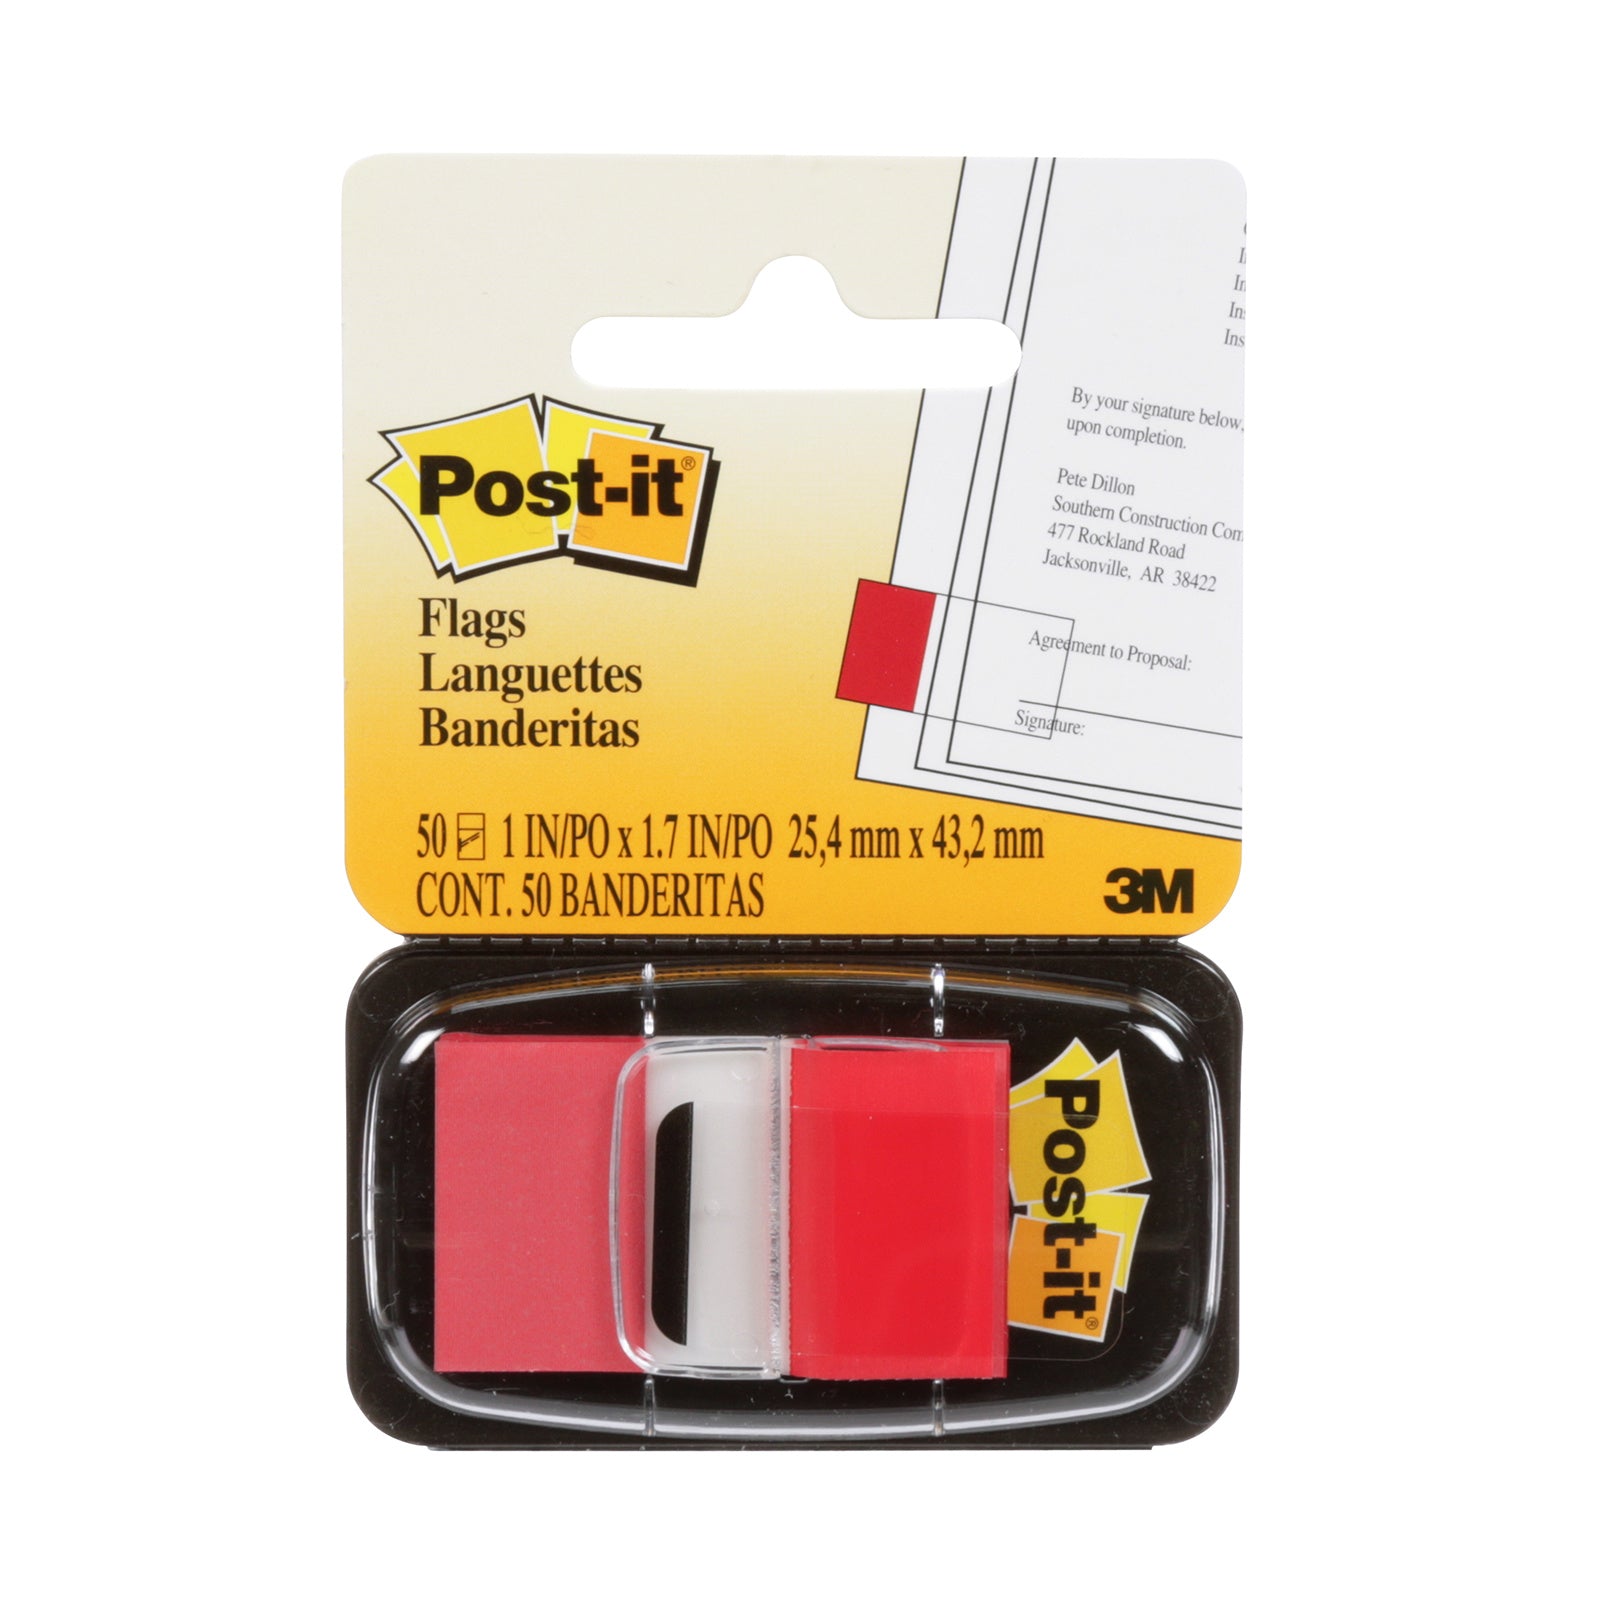 Post-It Assorted Sticky Note, 35 Notes per Pad, 43.1mm x 11.9mm